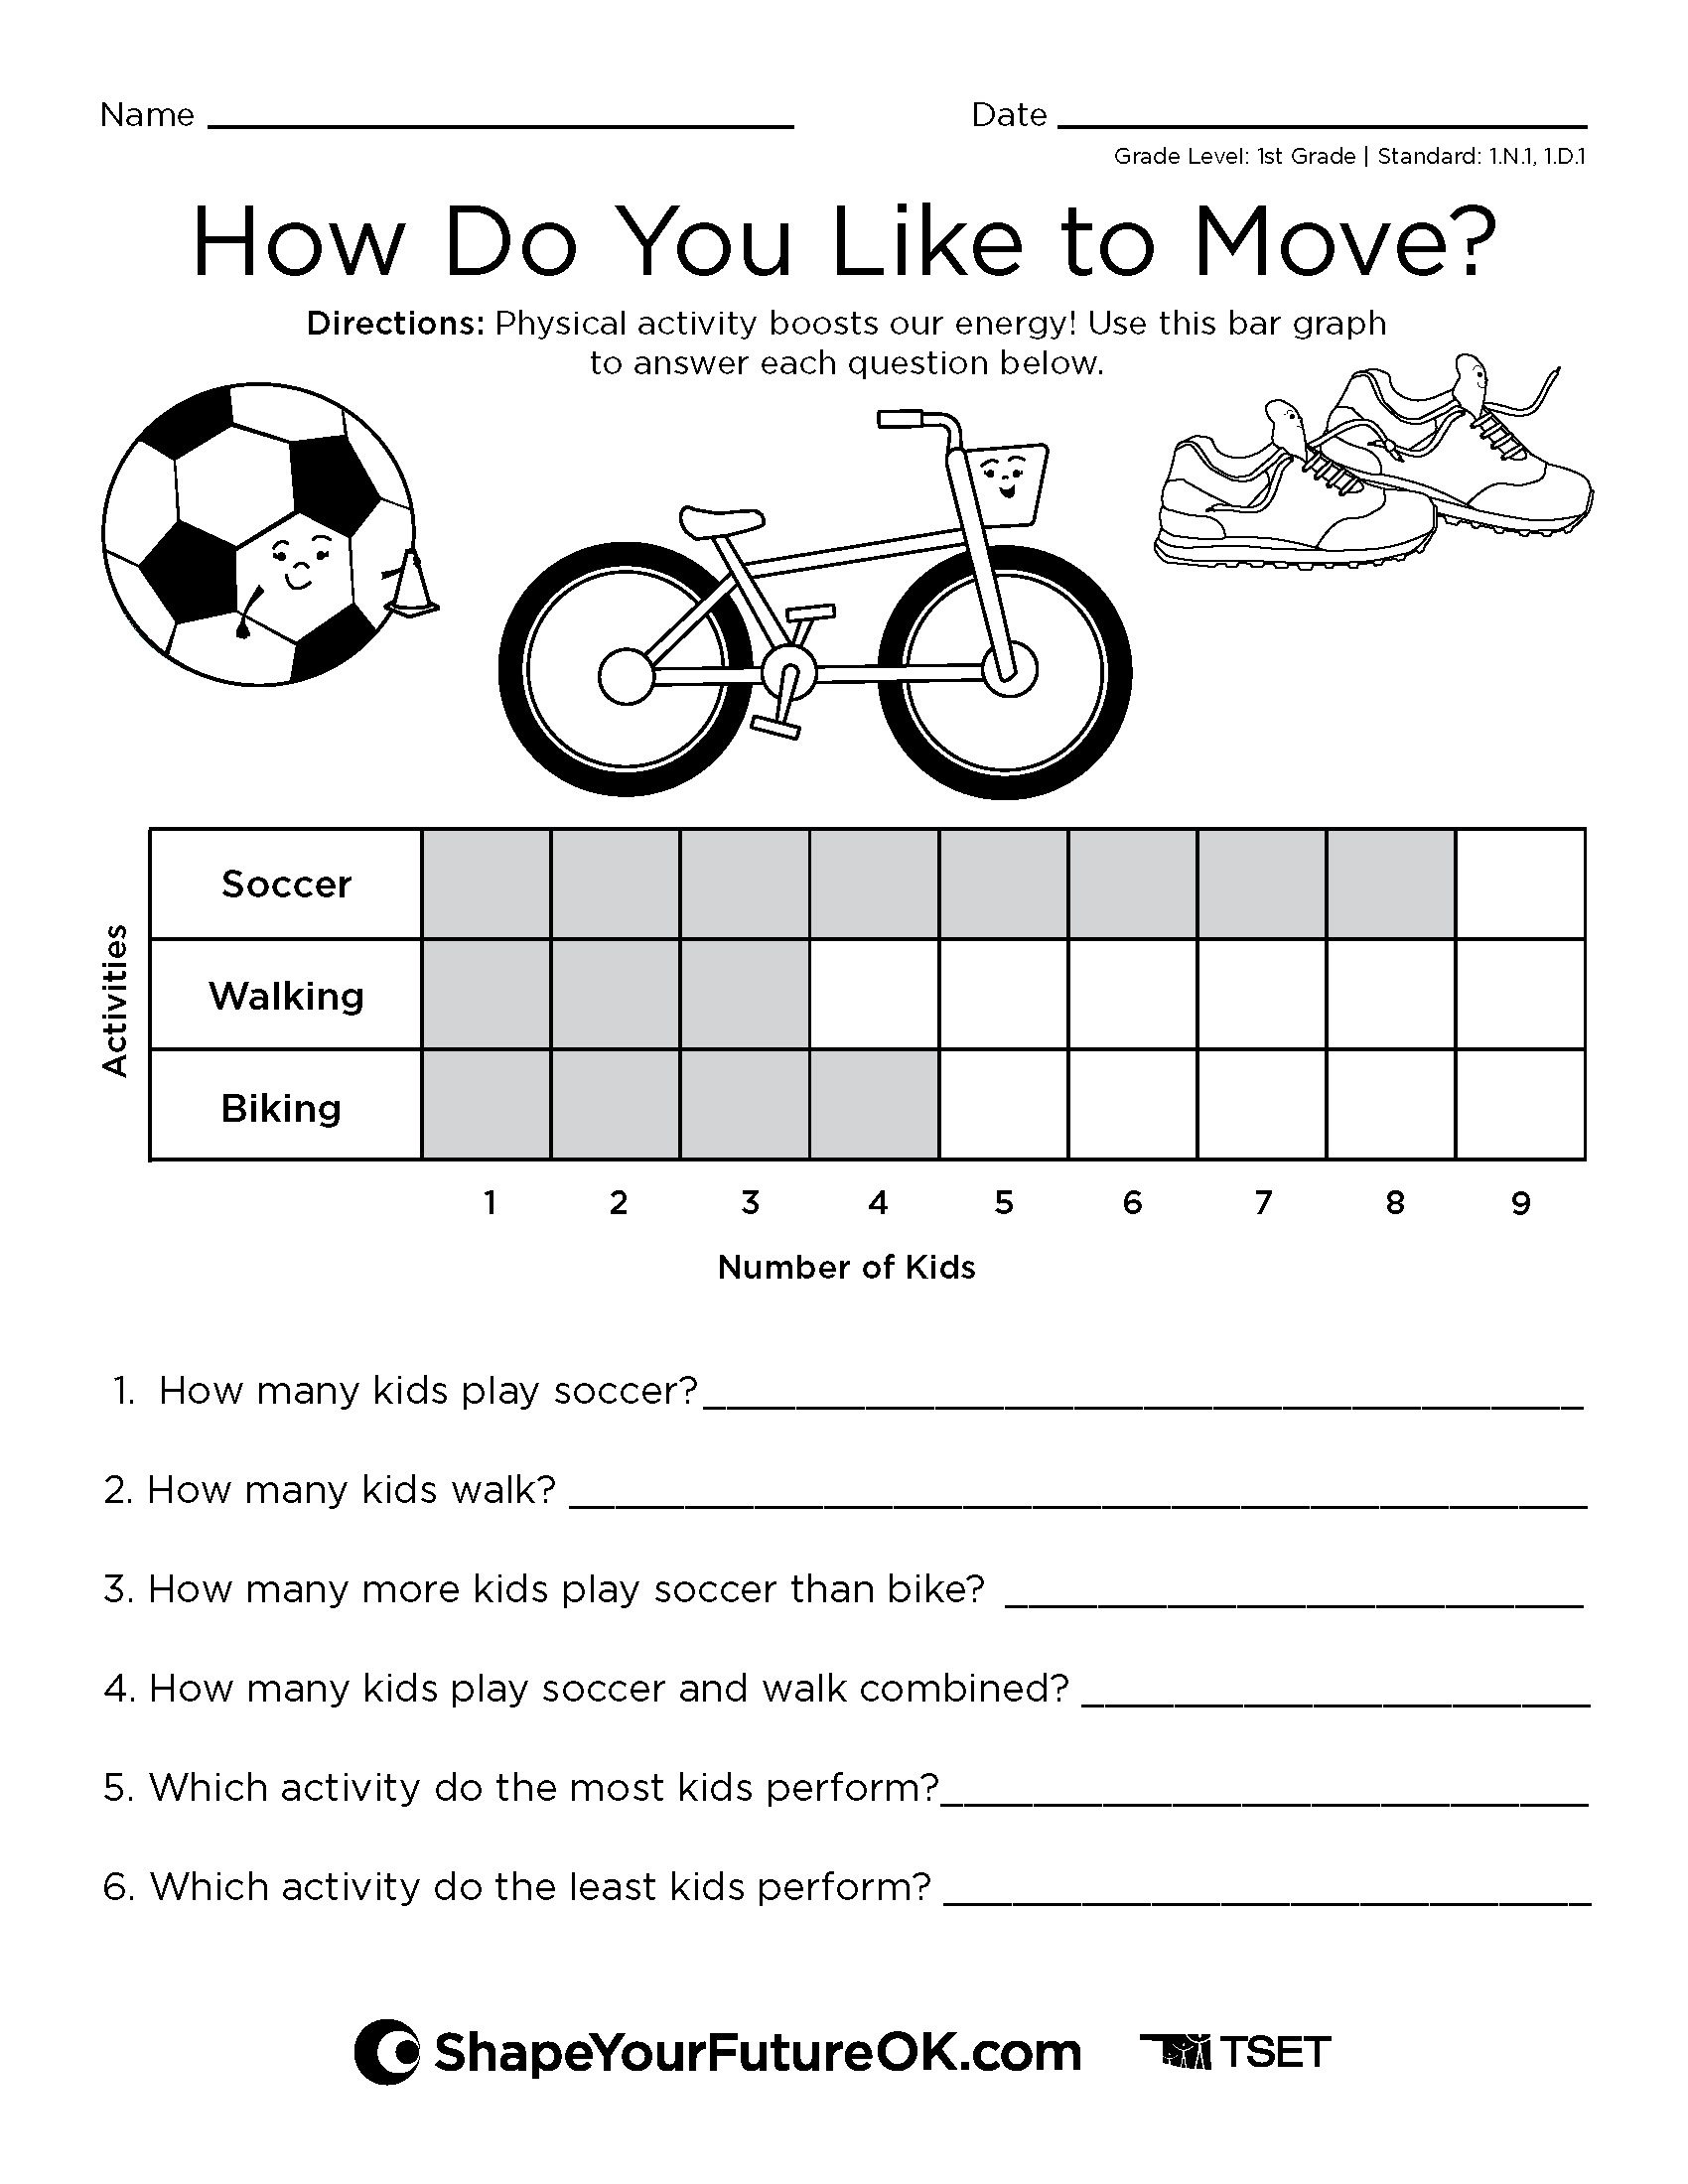 “How Do You Like to Move?” Worksheet: 1st Grade download